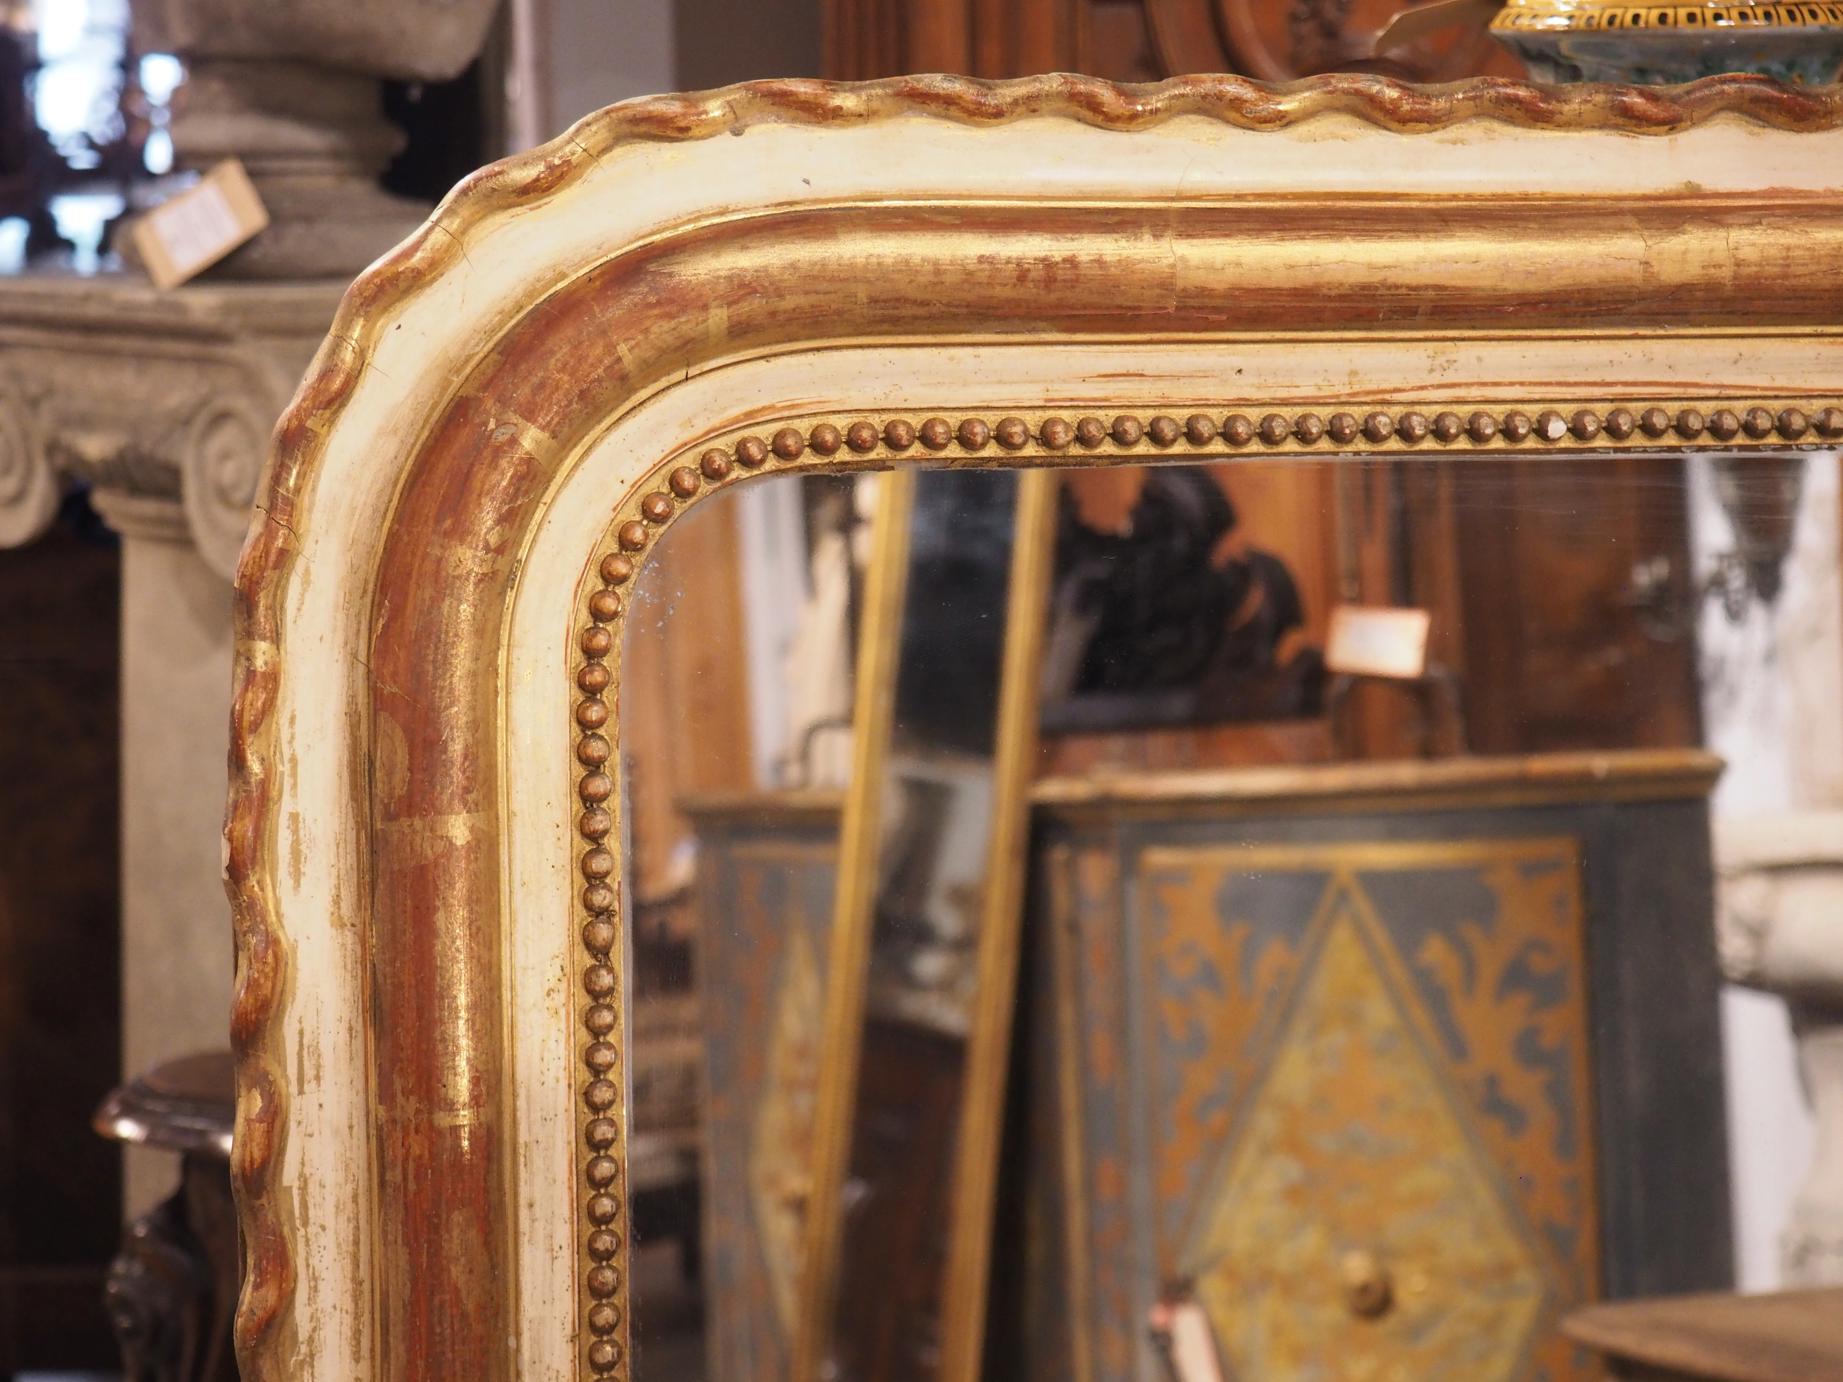 Large 19th Century French Louis Philippe Period Giltwood Mirror